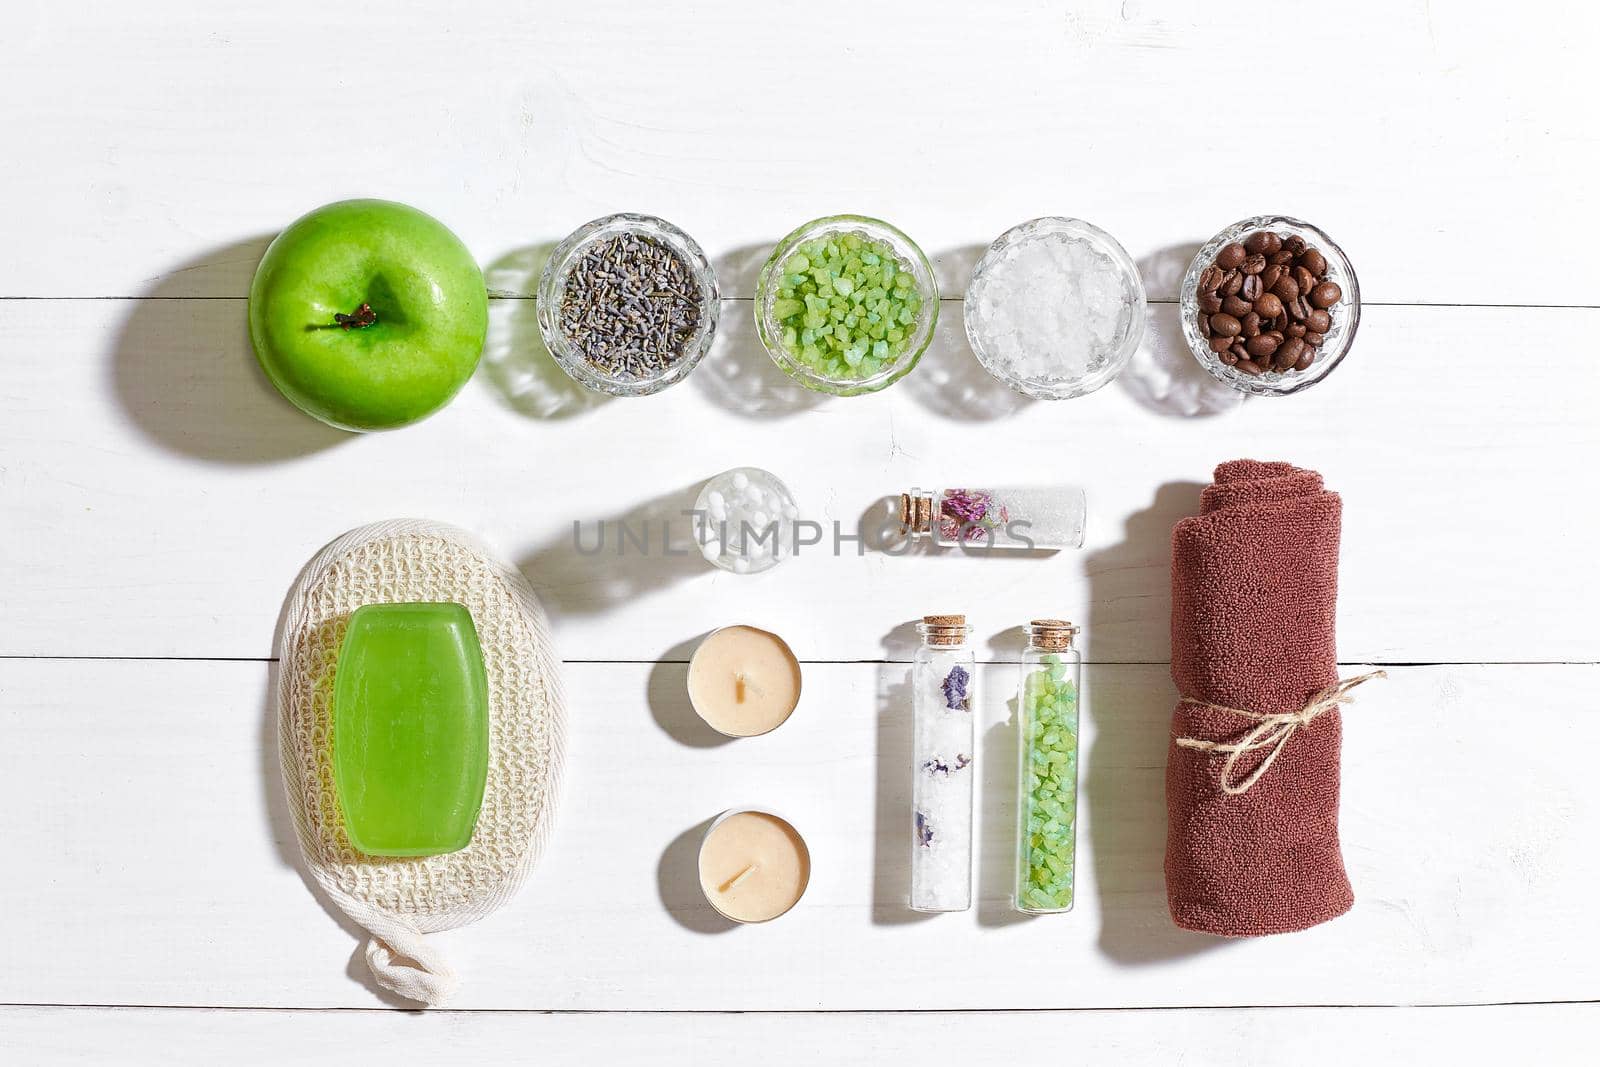 Composition of spa treatment on white wooden table with space for text. Top view. Still life. Flat lay